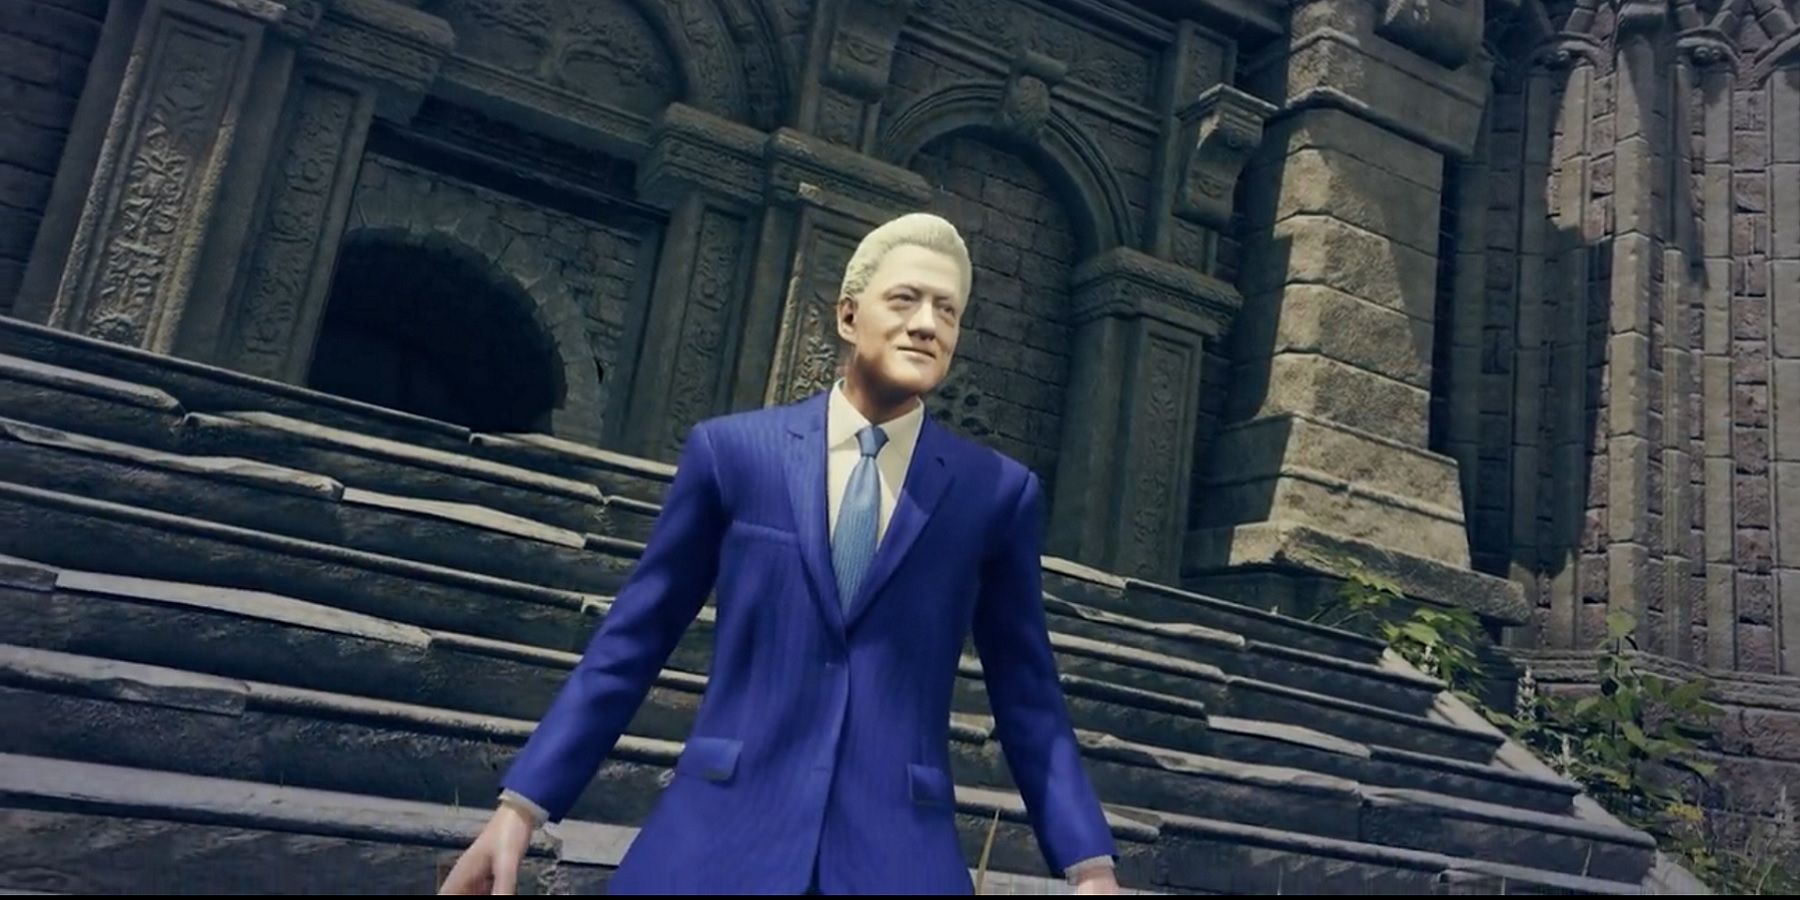 Bill Clinton modded into Elden Ring after bizarre Game Awards